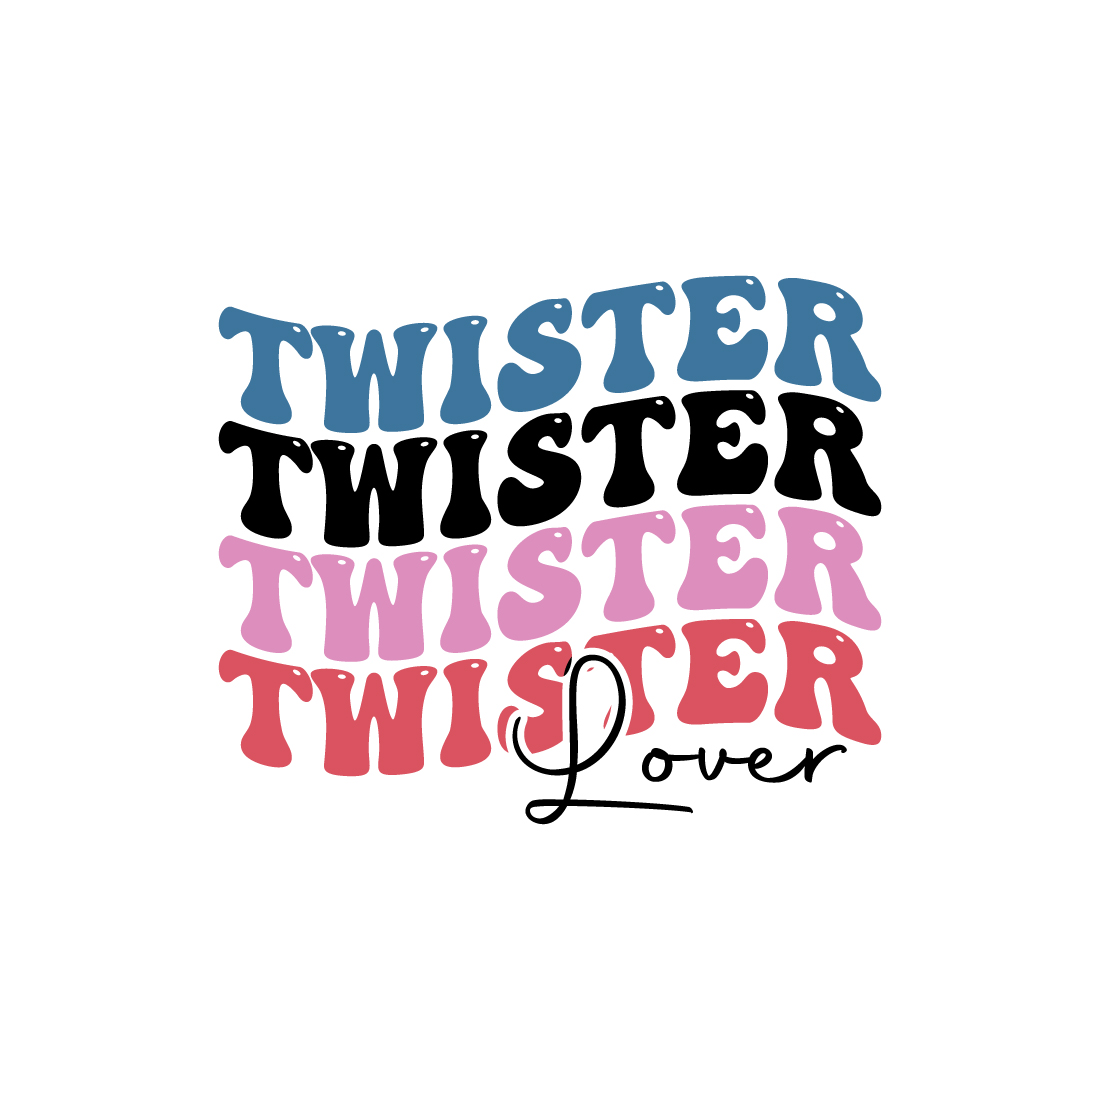 Twister lover indoor game retro typography design for t-shirts, cards, frame artwork, phone cases, bags, mugs, stickers, tumblers, print, etc cover image.